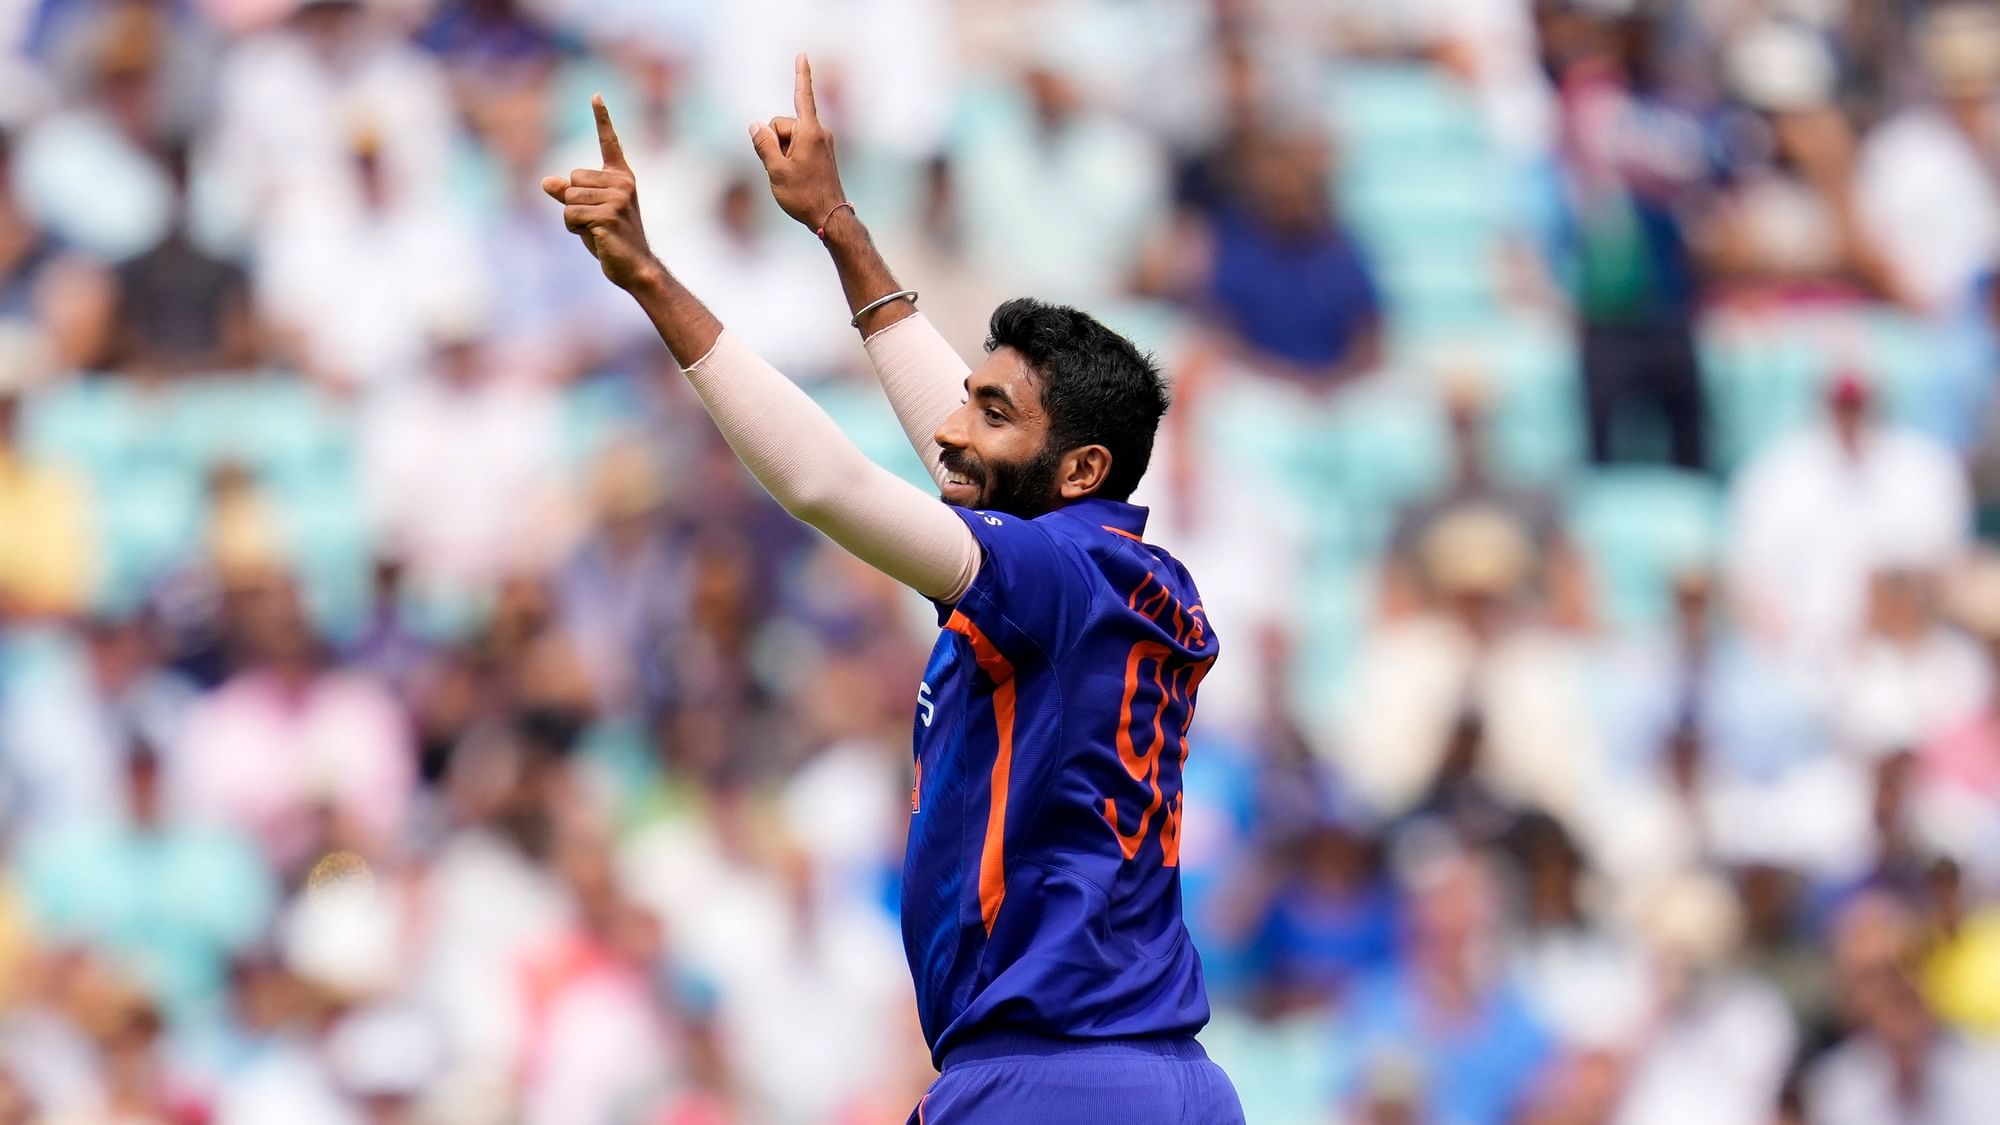 <div class="paragraphs"><p>India's Jasprit Bumrah ended with career-best figures of 6/19 from 7.2 overs in the first ODI against England on Tuesday.</p></div>